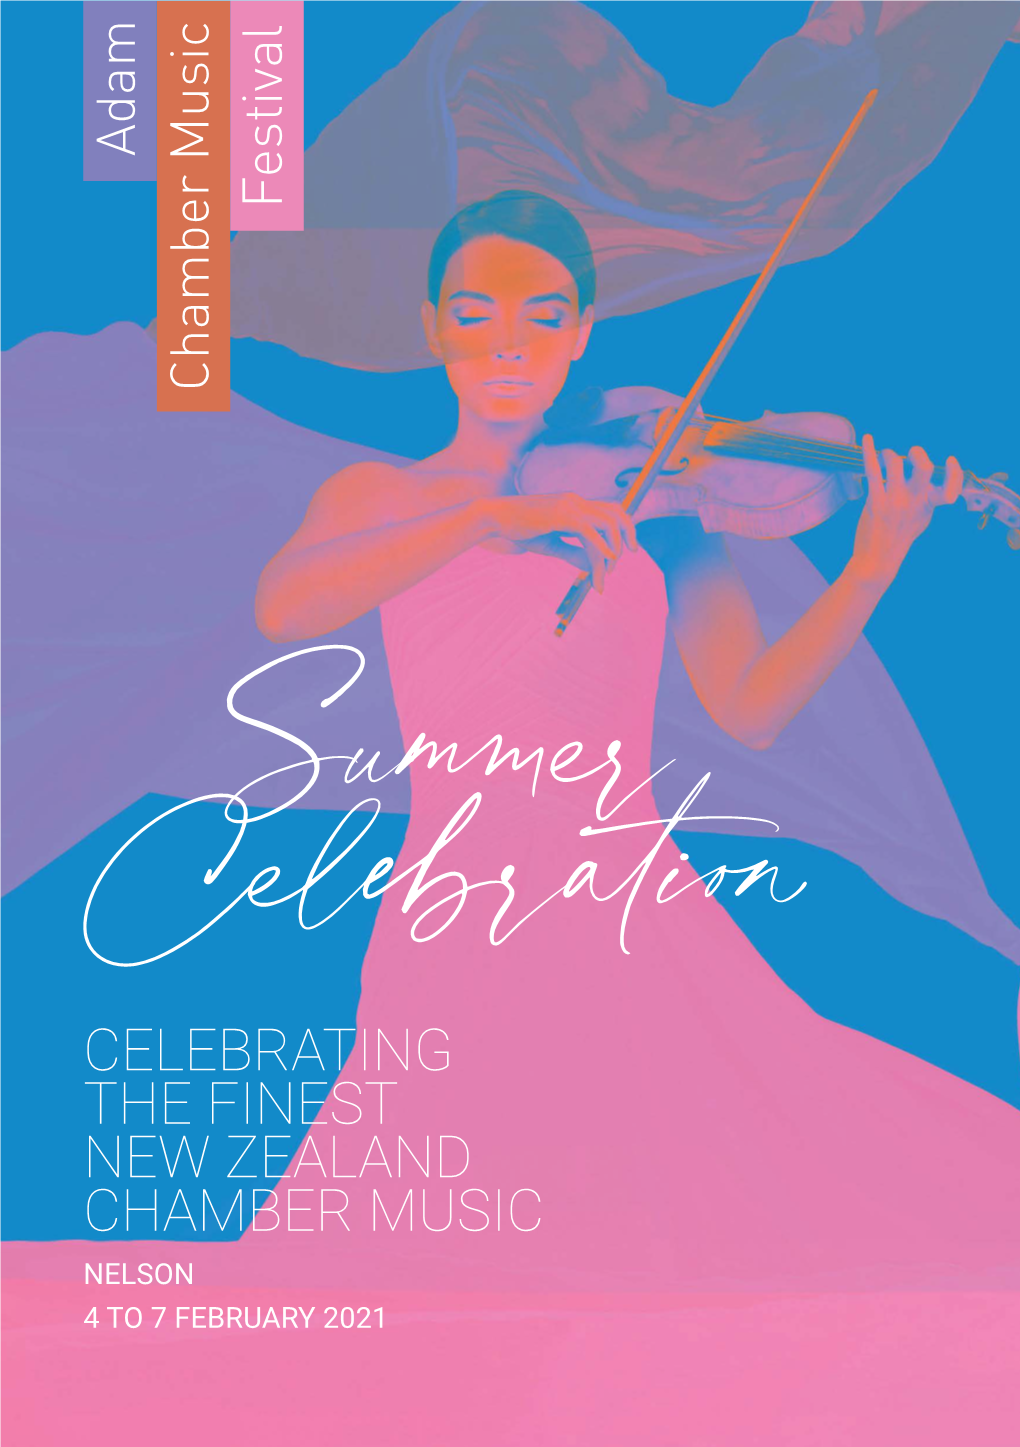 Celebrating the Finest New Zealand Chamber Music Nelson 4 to 7 February 2021 Colleen Marshall the Chair